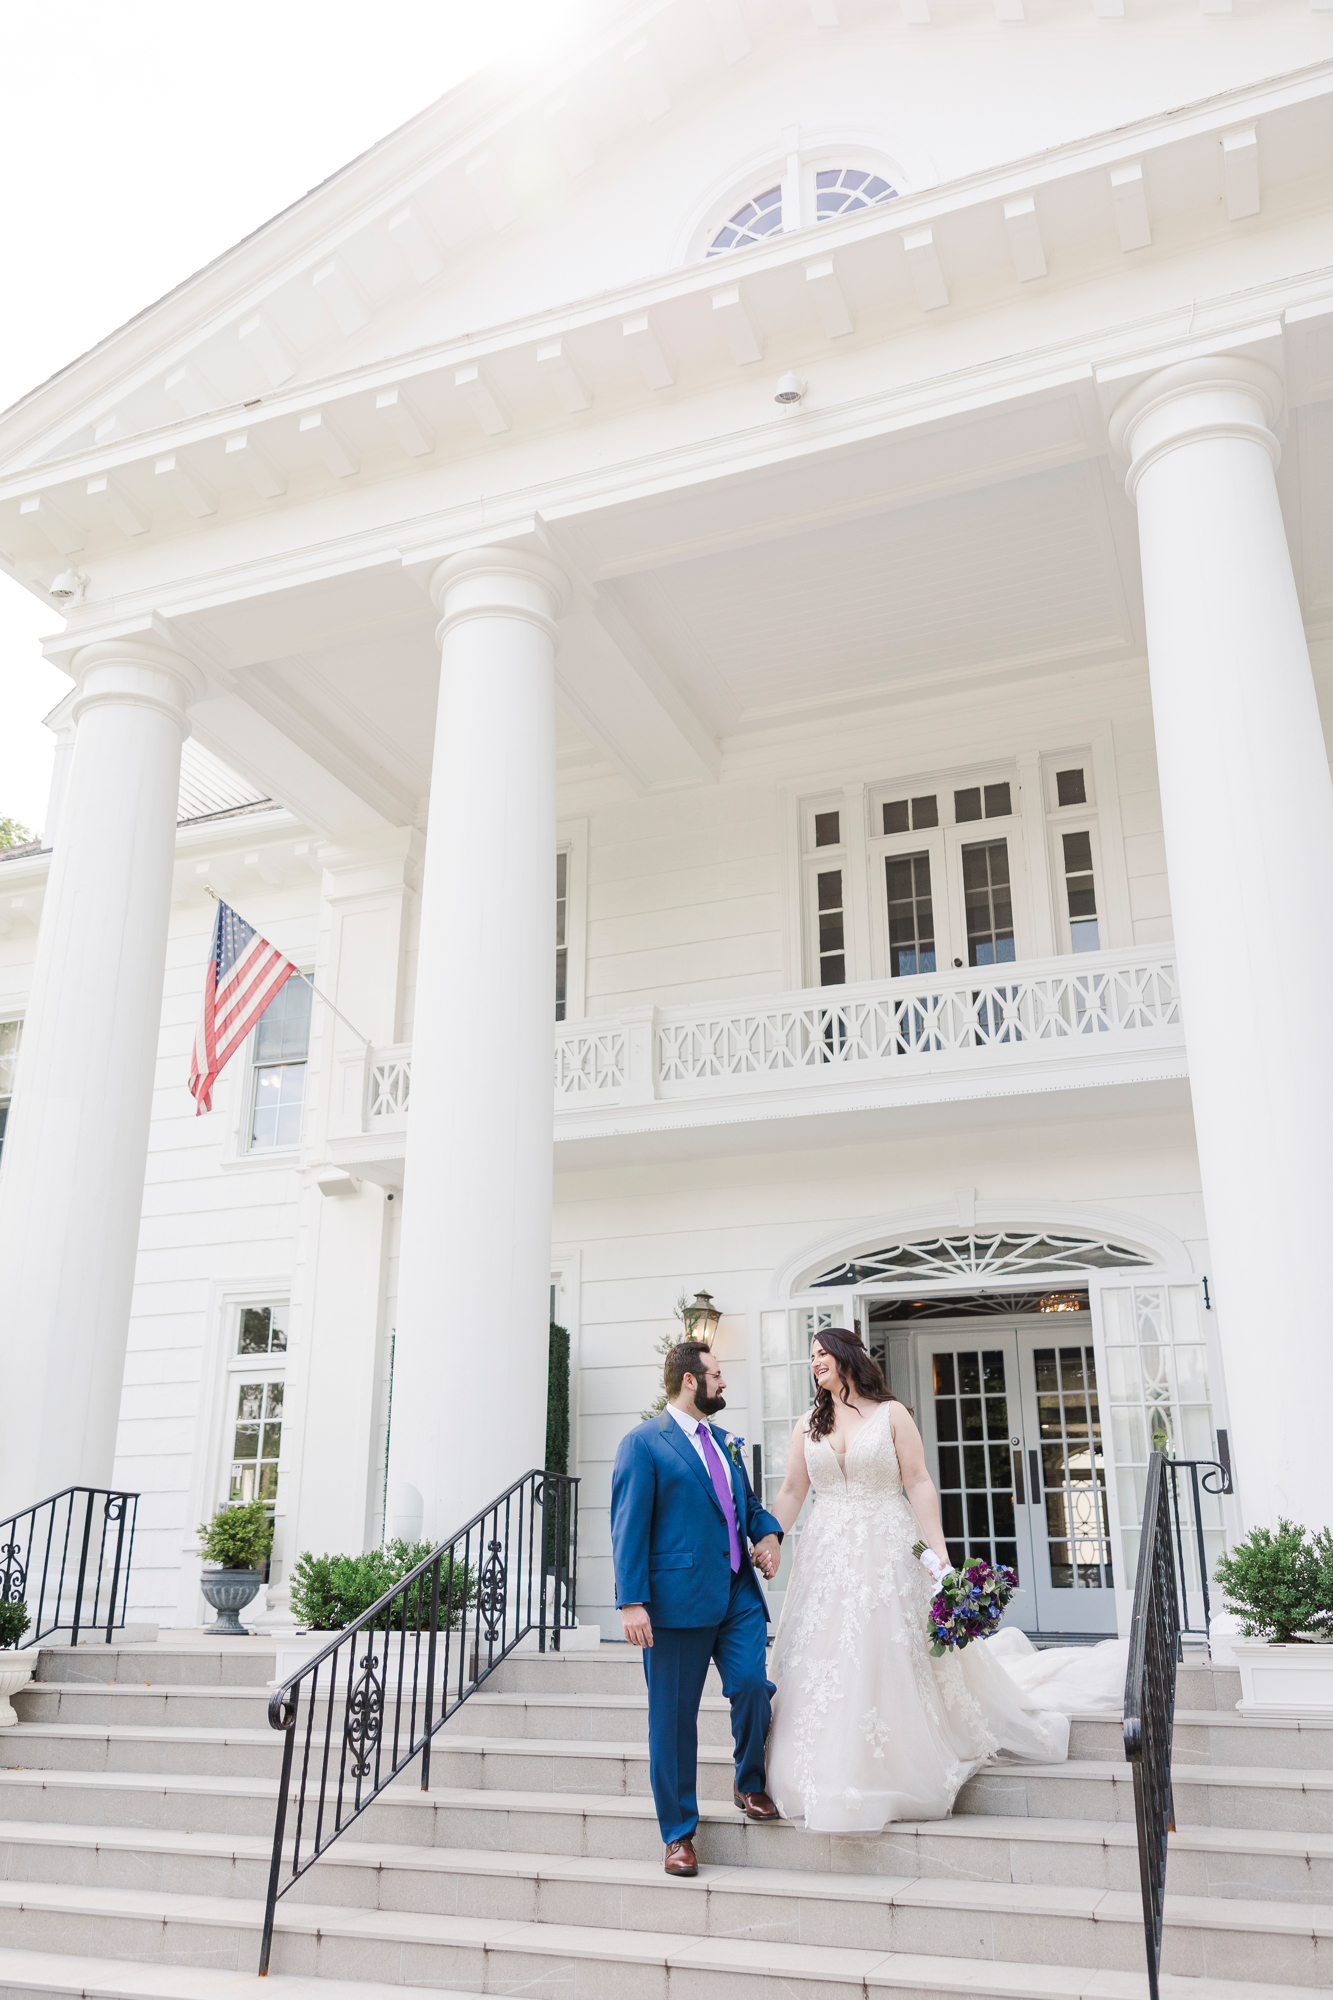 Gorgeous Wedding at Briarcliff Manor in New York